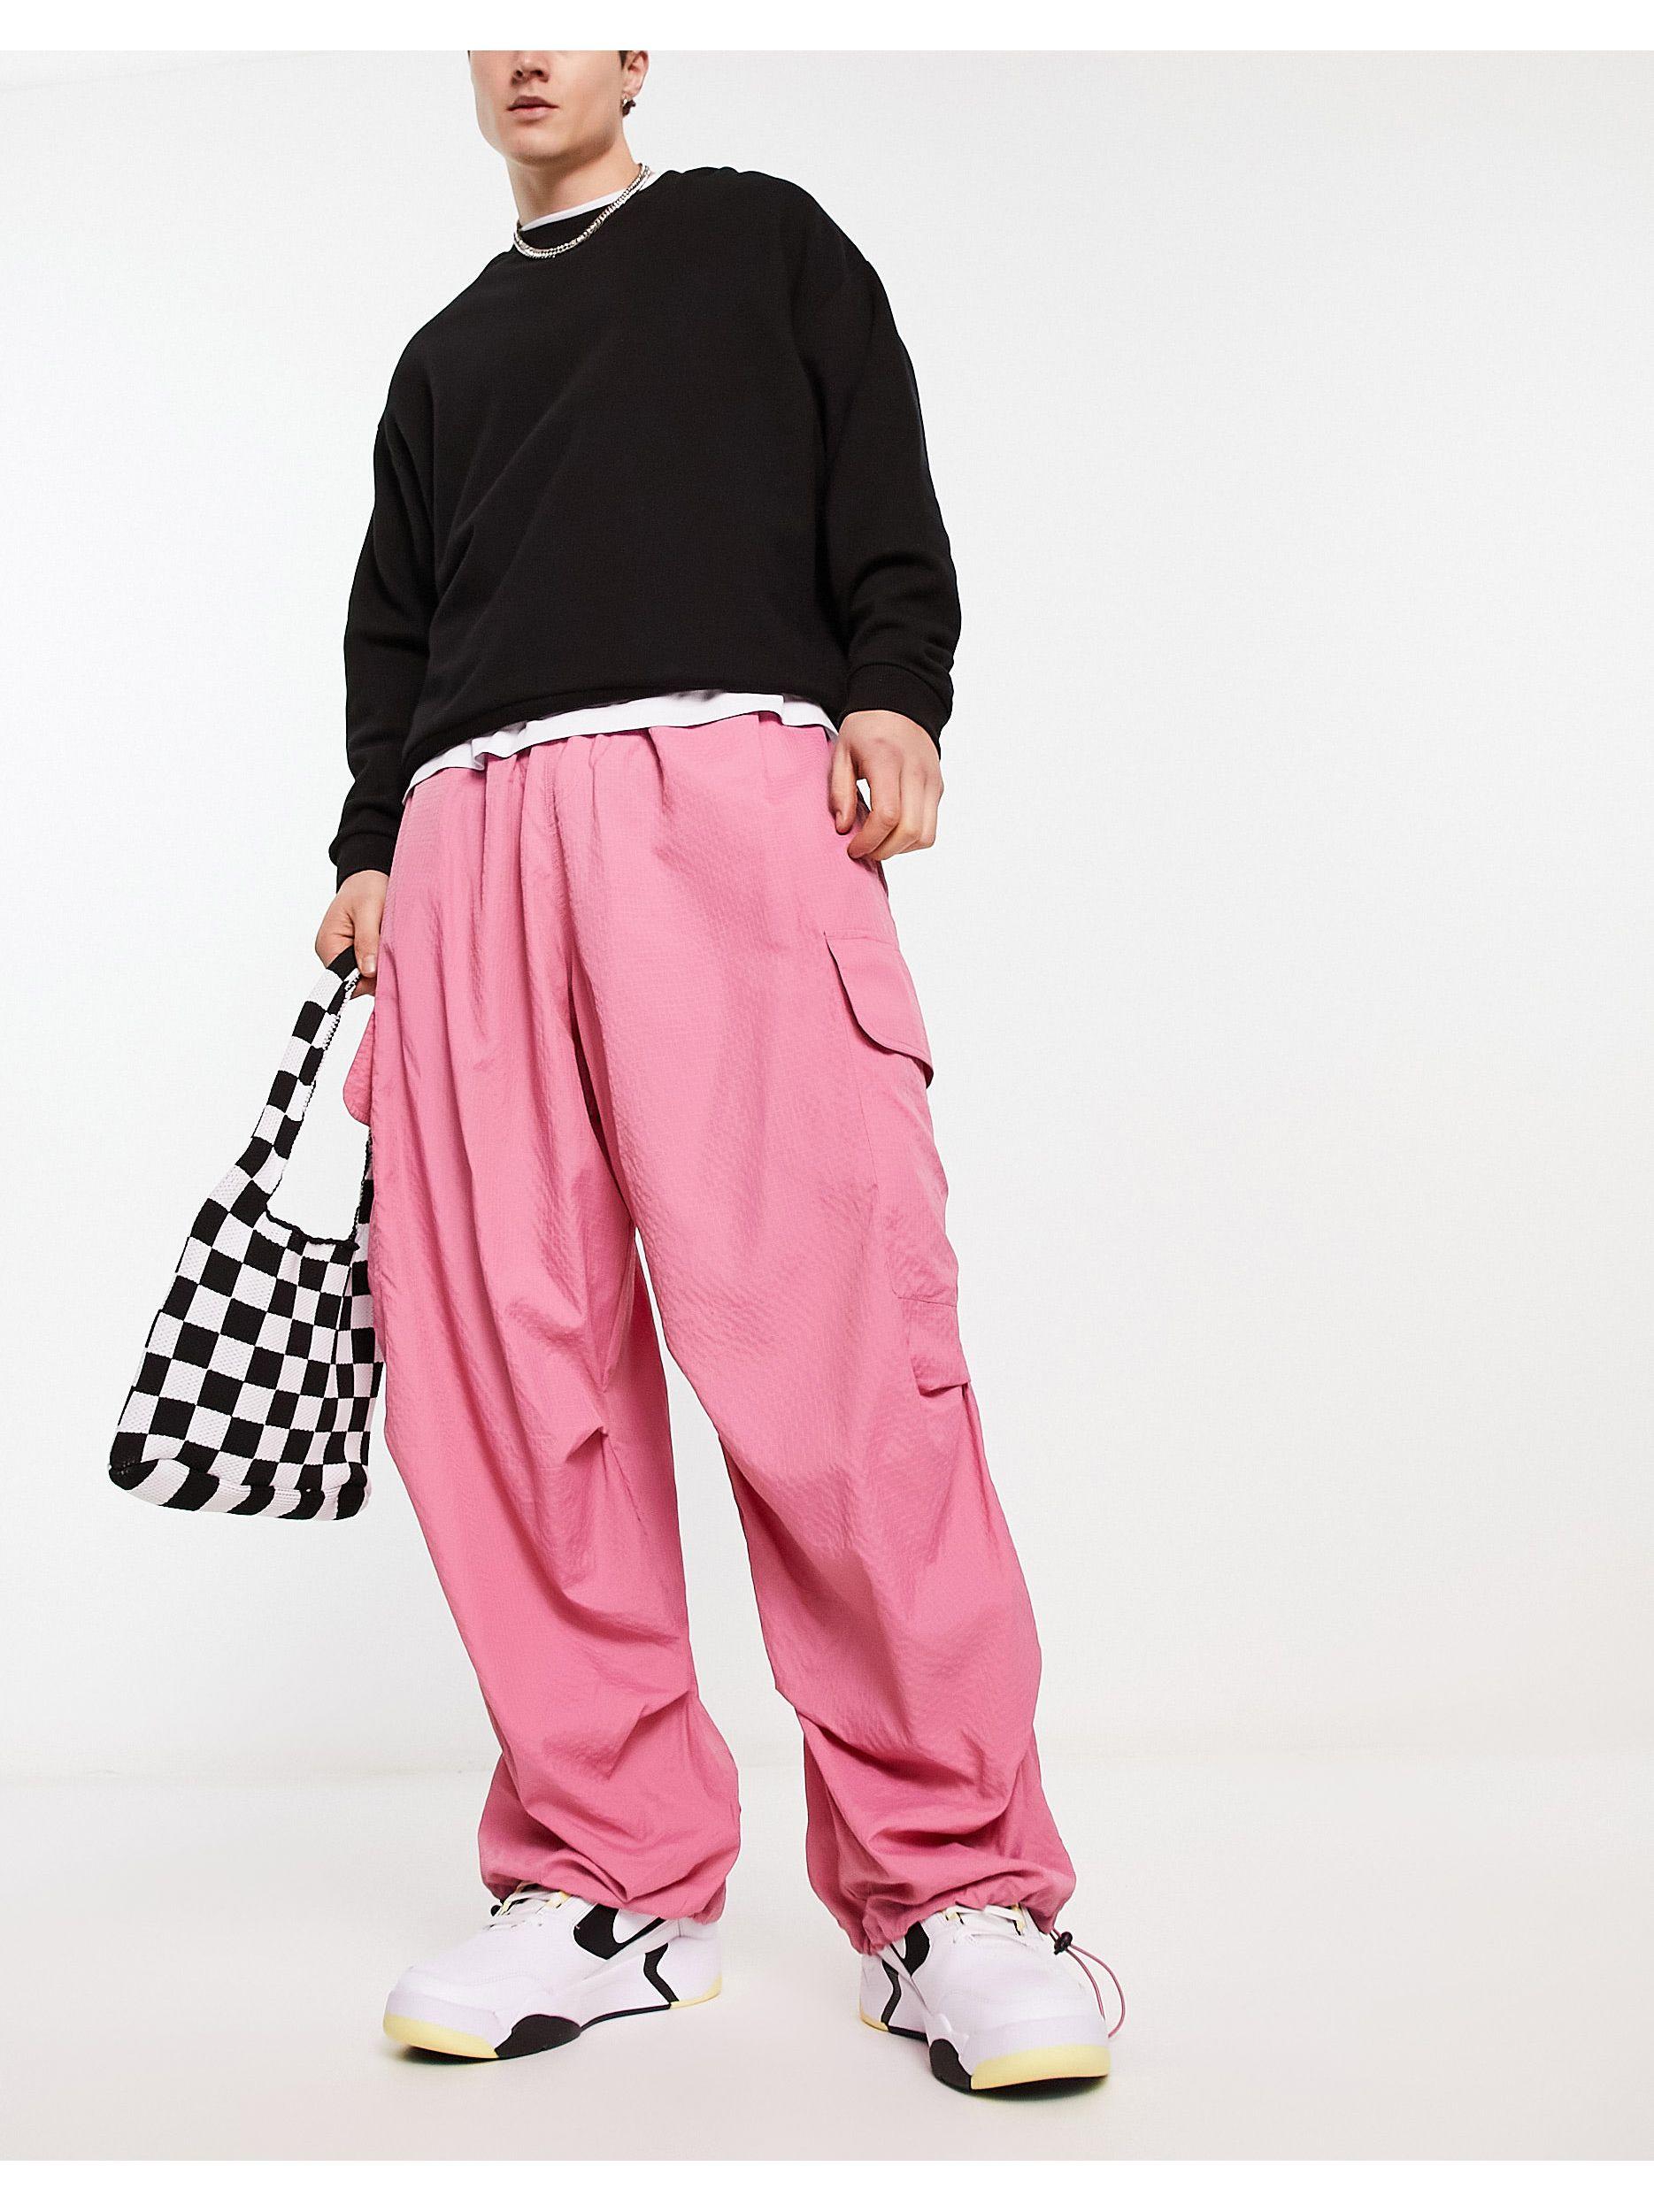 ASOS Parachute Cargo Trousers in Pink for Men